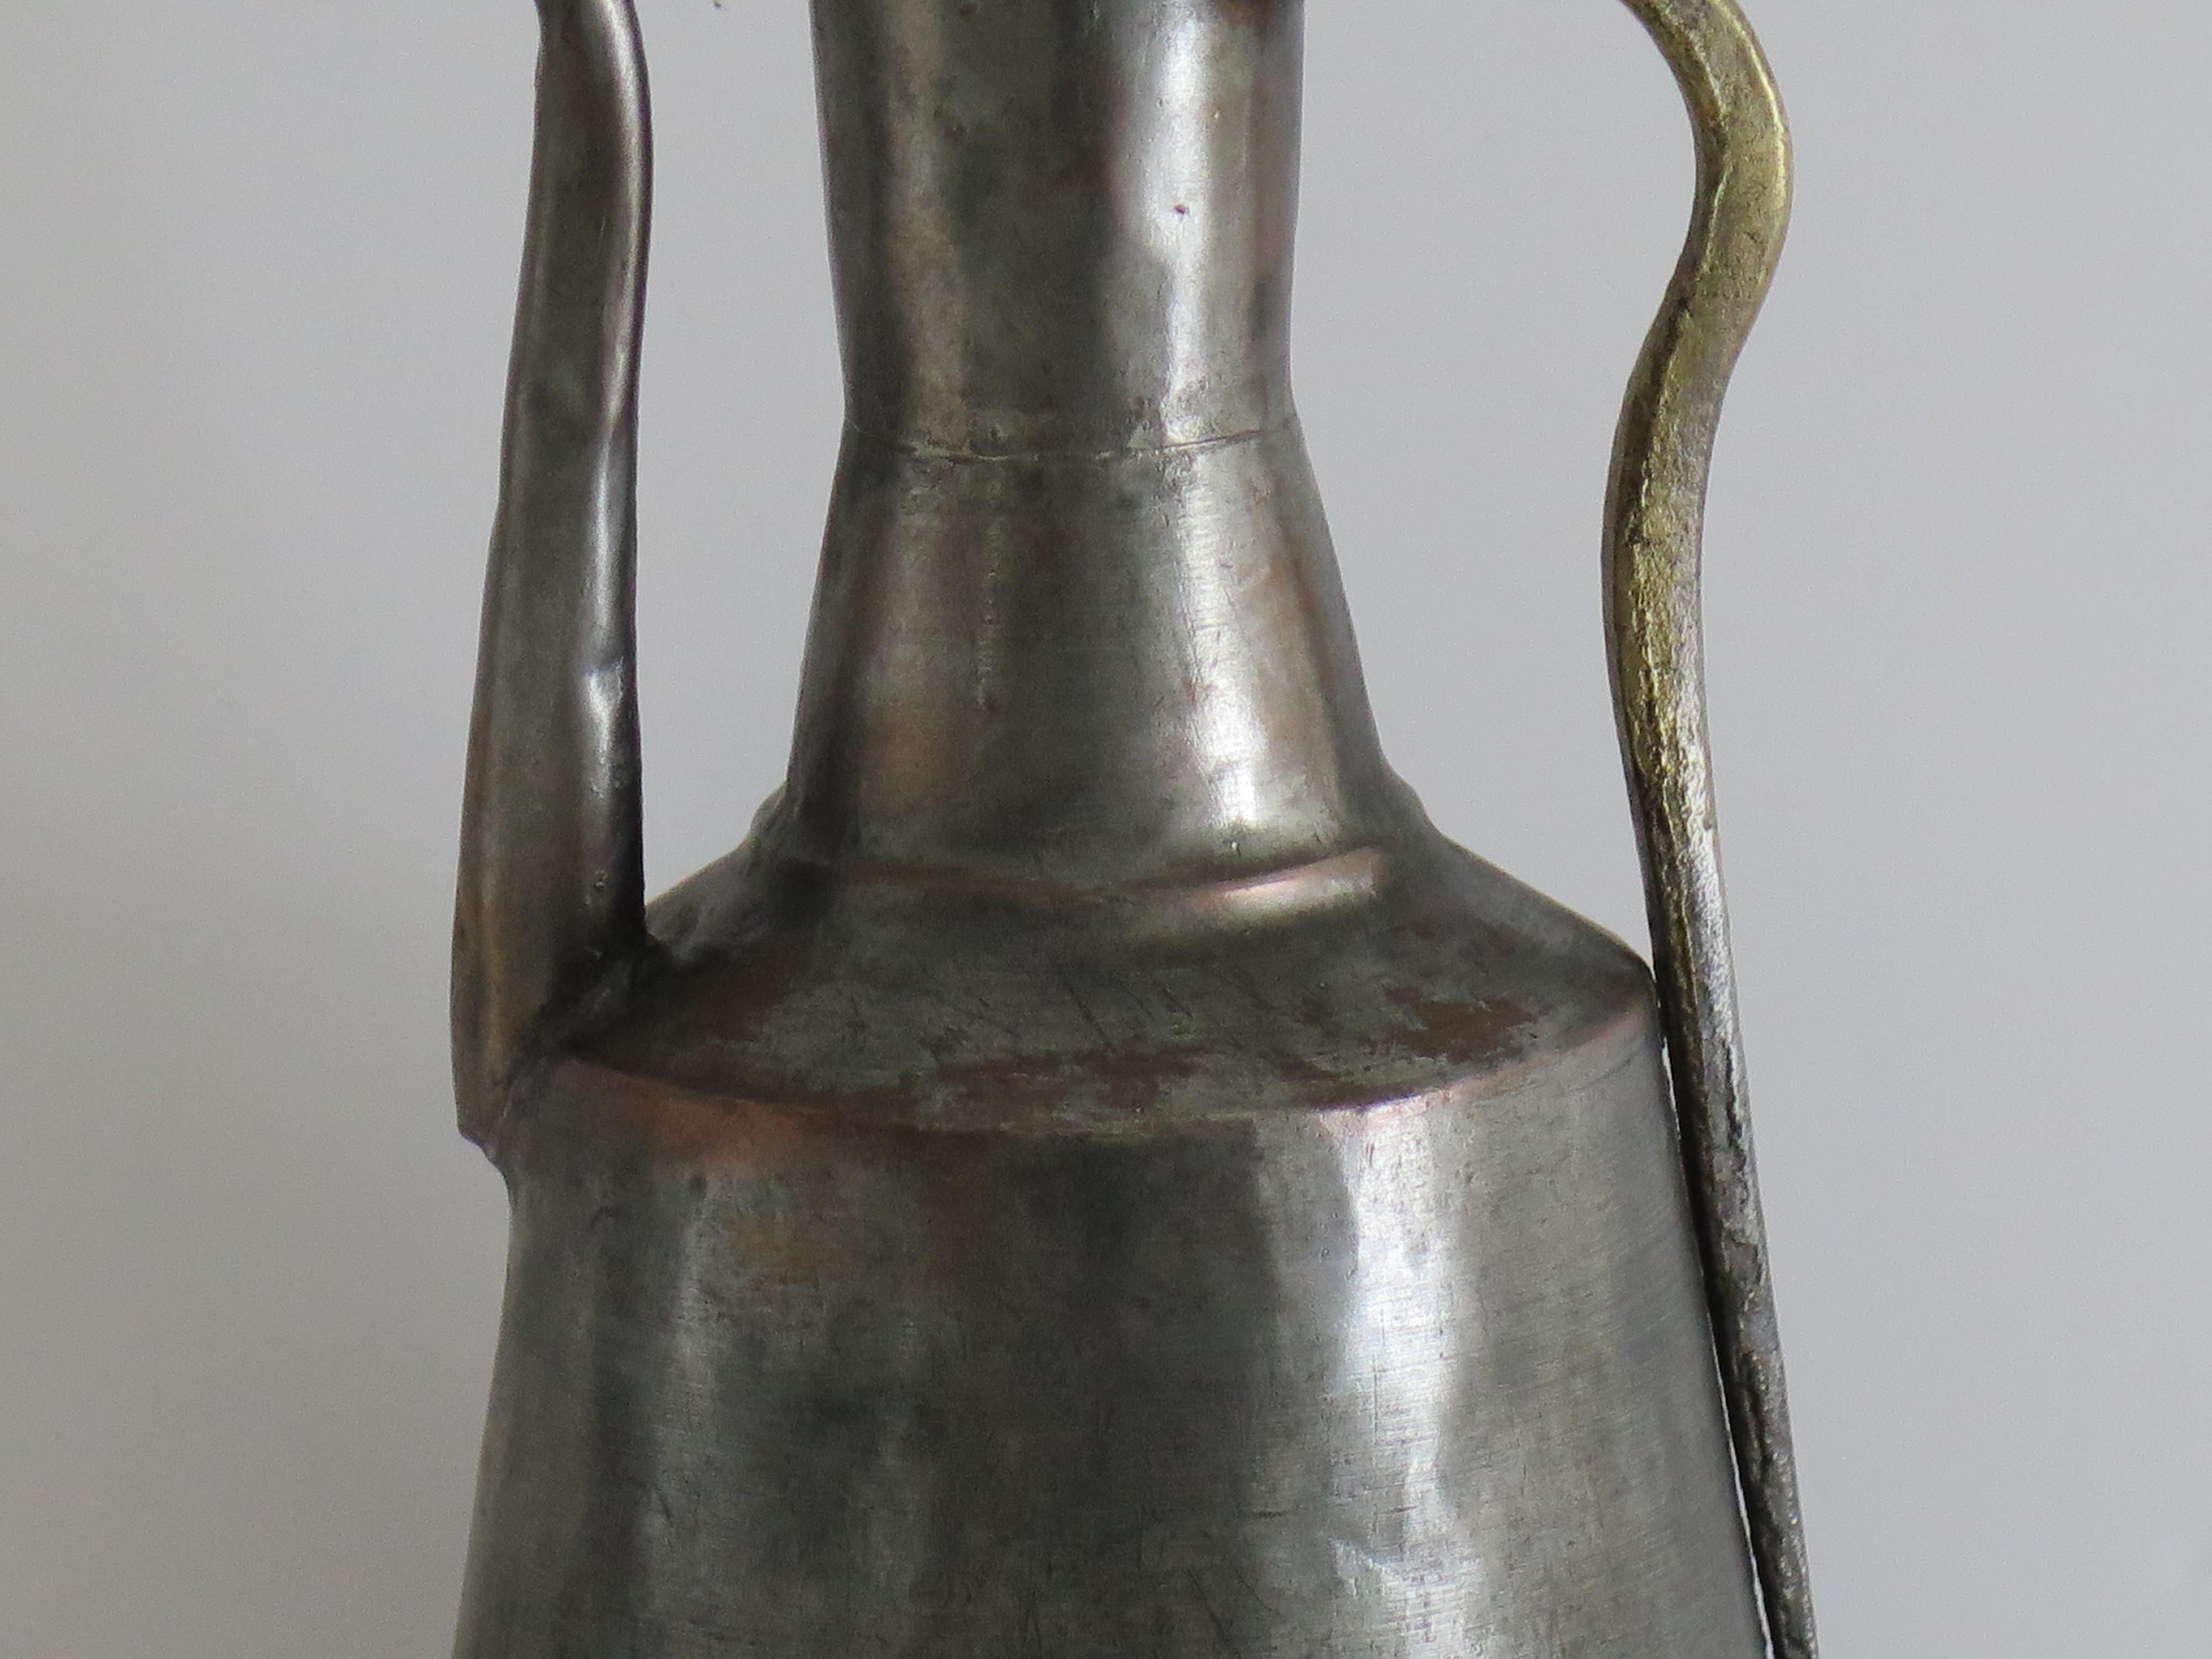 Ewer or Pitcher tinned Copper Turkish / Middle Eastern, Early 19th Century For Sale 4